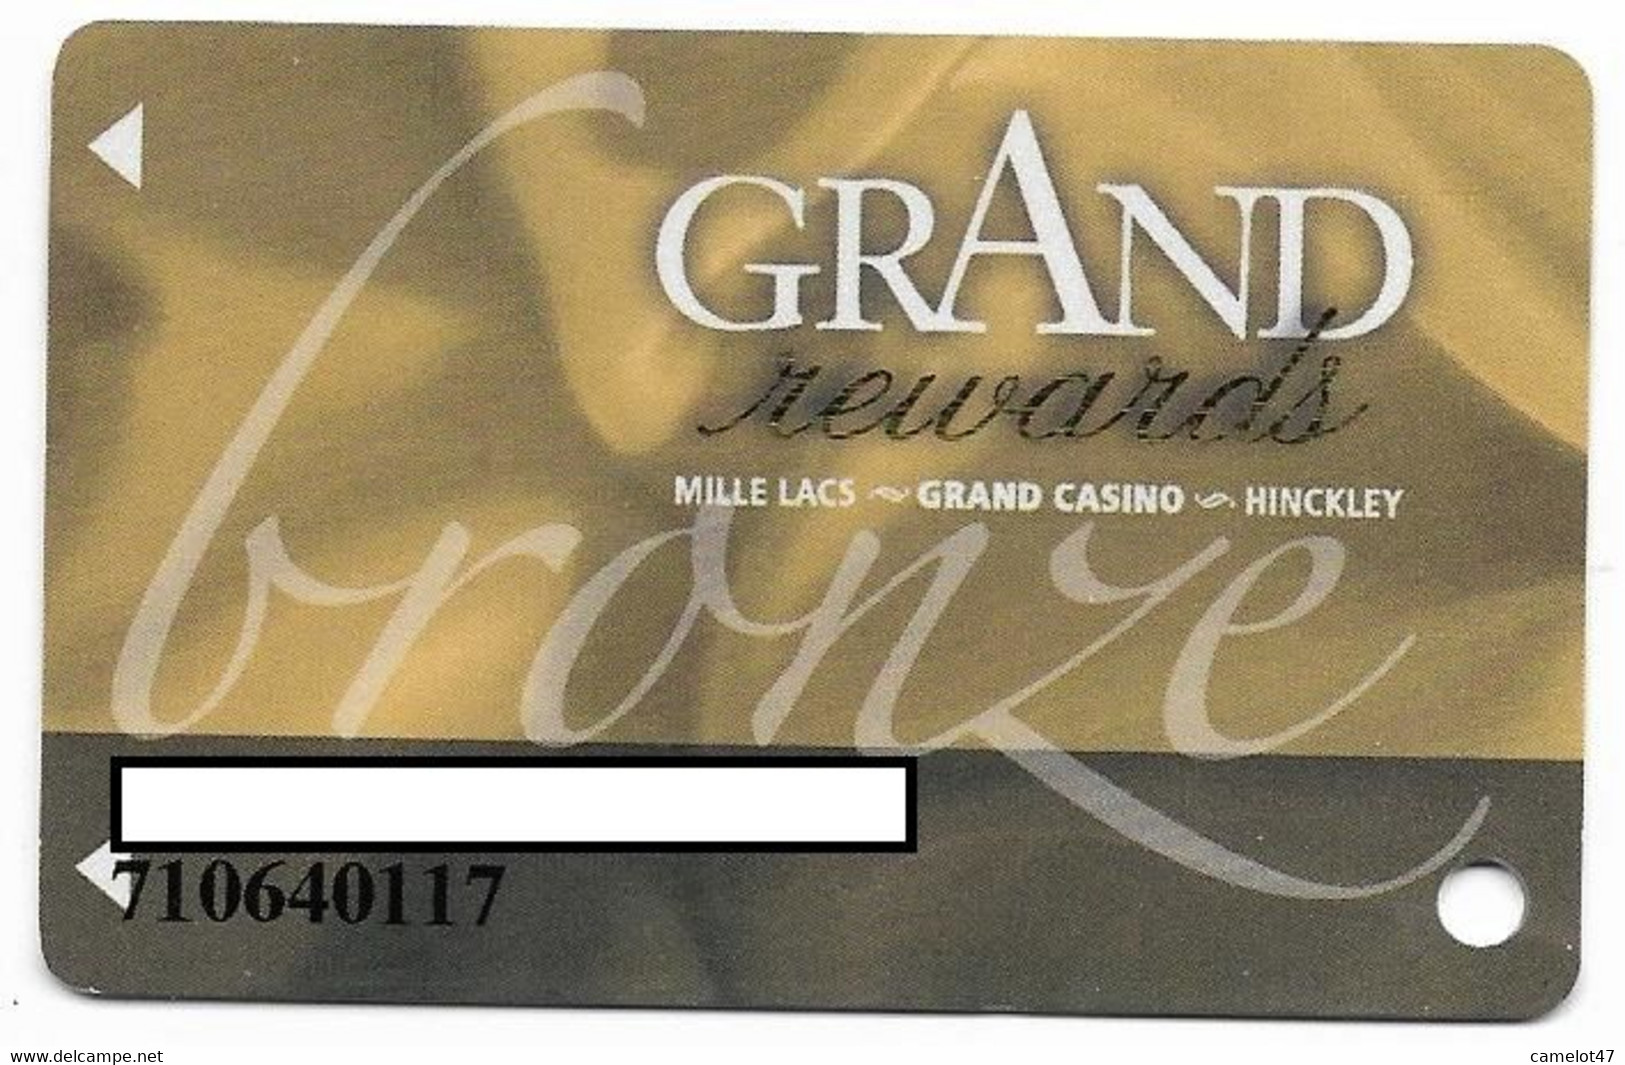 Grand Casino Mille Lacs, Onamia, MN, U.S.A. Older Used Slot Or Player's Card, # Grandmillelacs-2 - Casino Cards